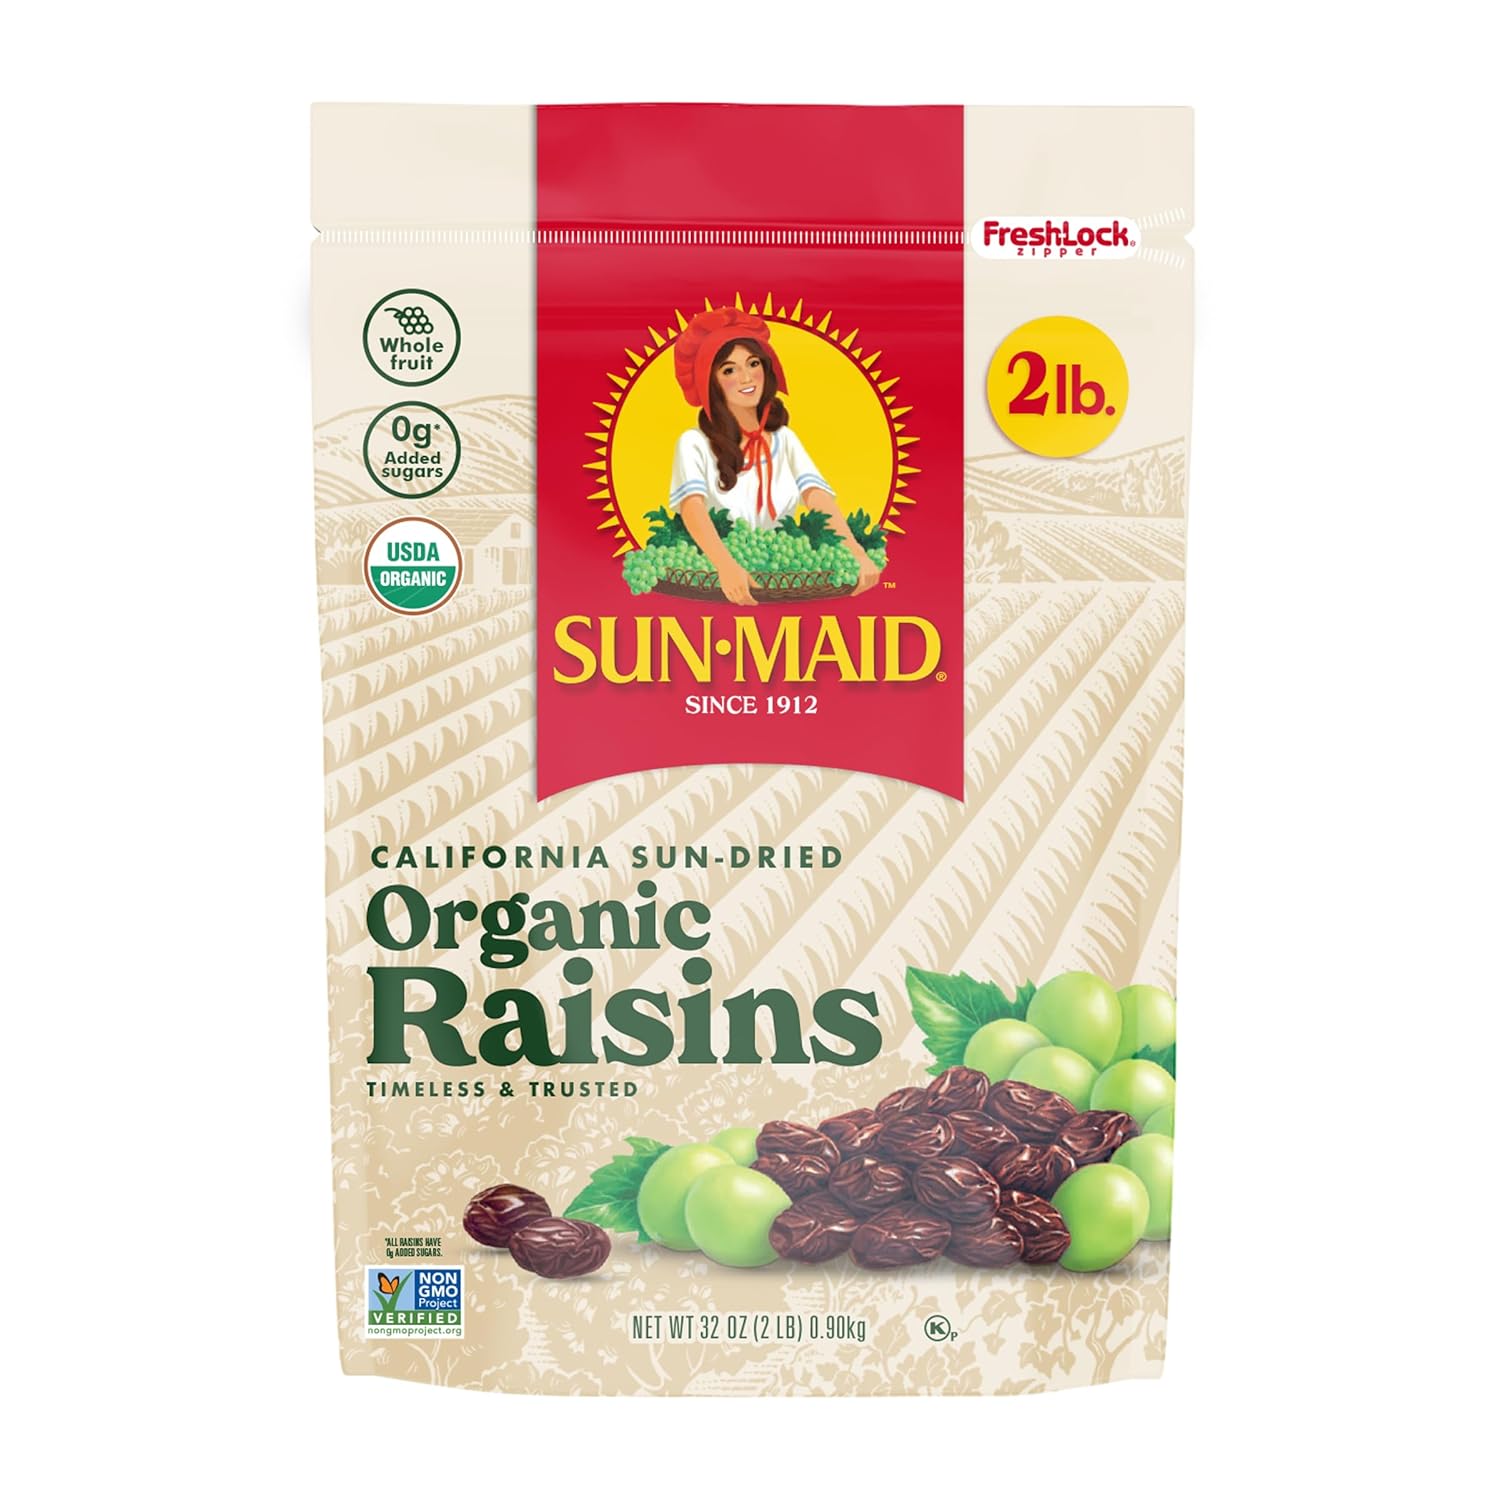 Sun-Maid Organic California Sun-Dried Raisins - 32 oz Resealable Bag - Organic Dried Fruit Snack for Lunches, Snacks, and Natural Sweeteners